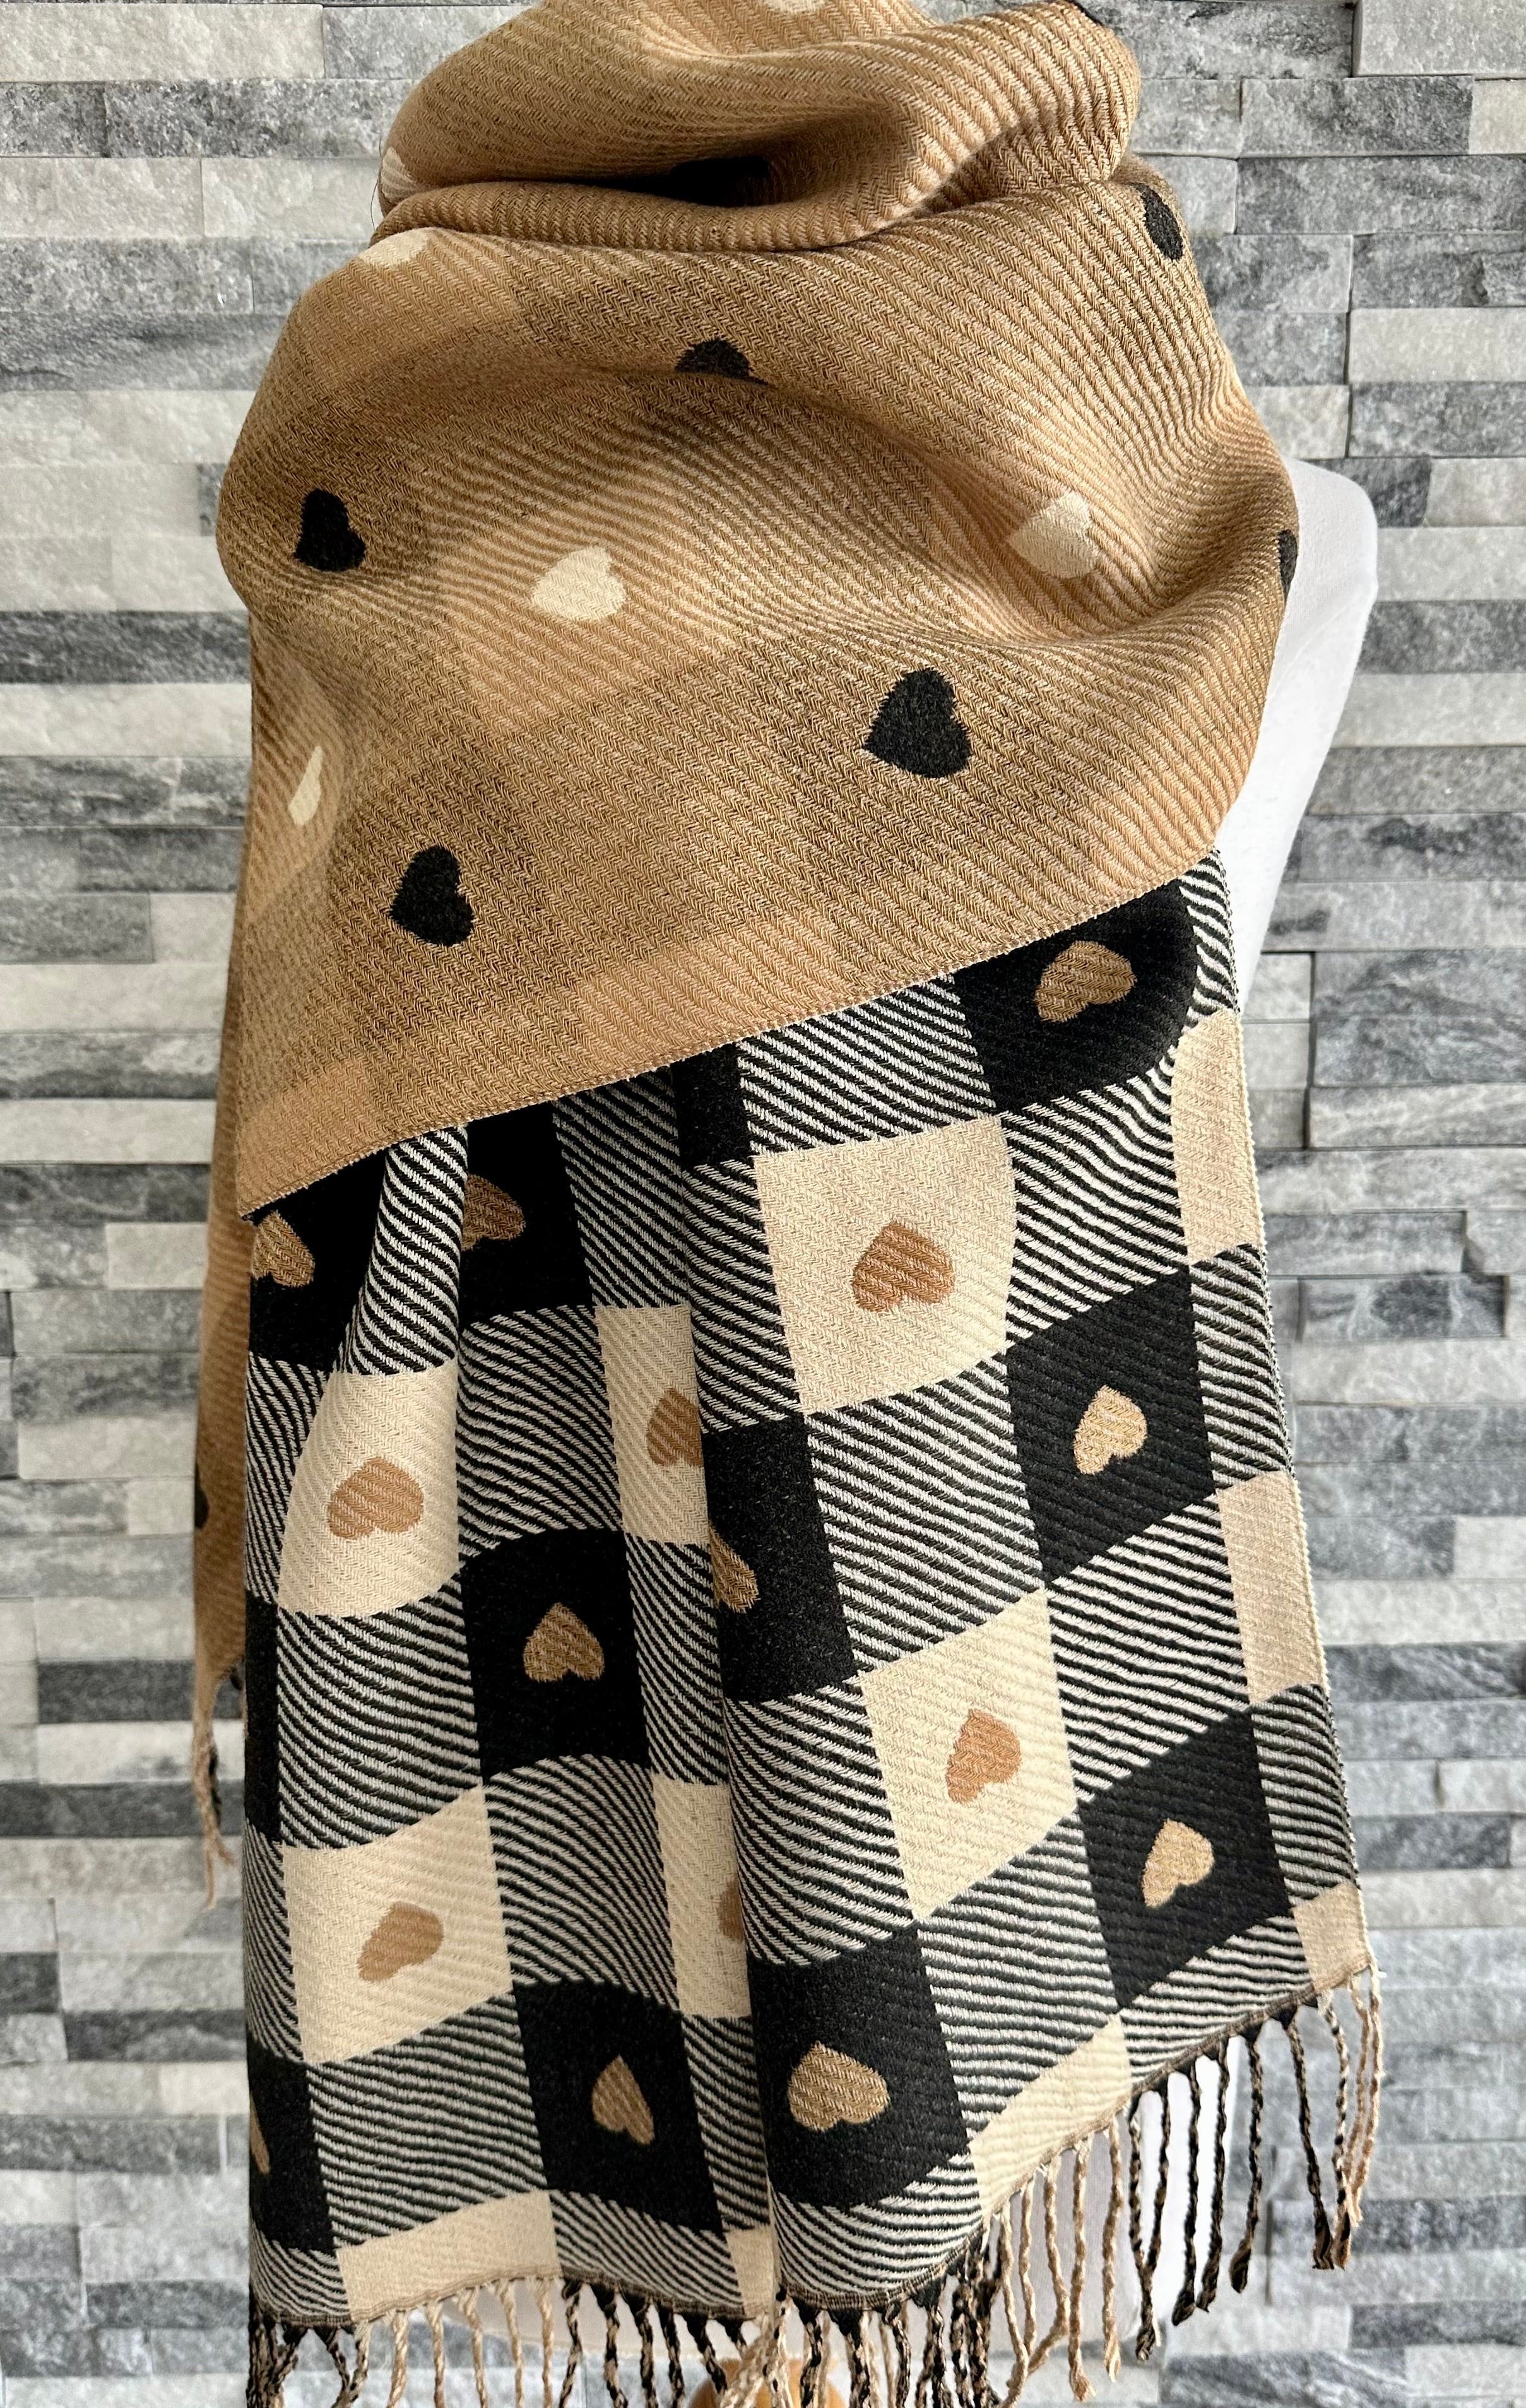 lusciousscarves Black , Cream and Beige Reversible Hearts and Checks Scarf / Wrap. Cashmere Blend .